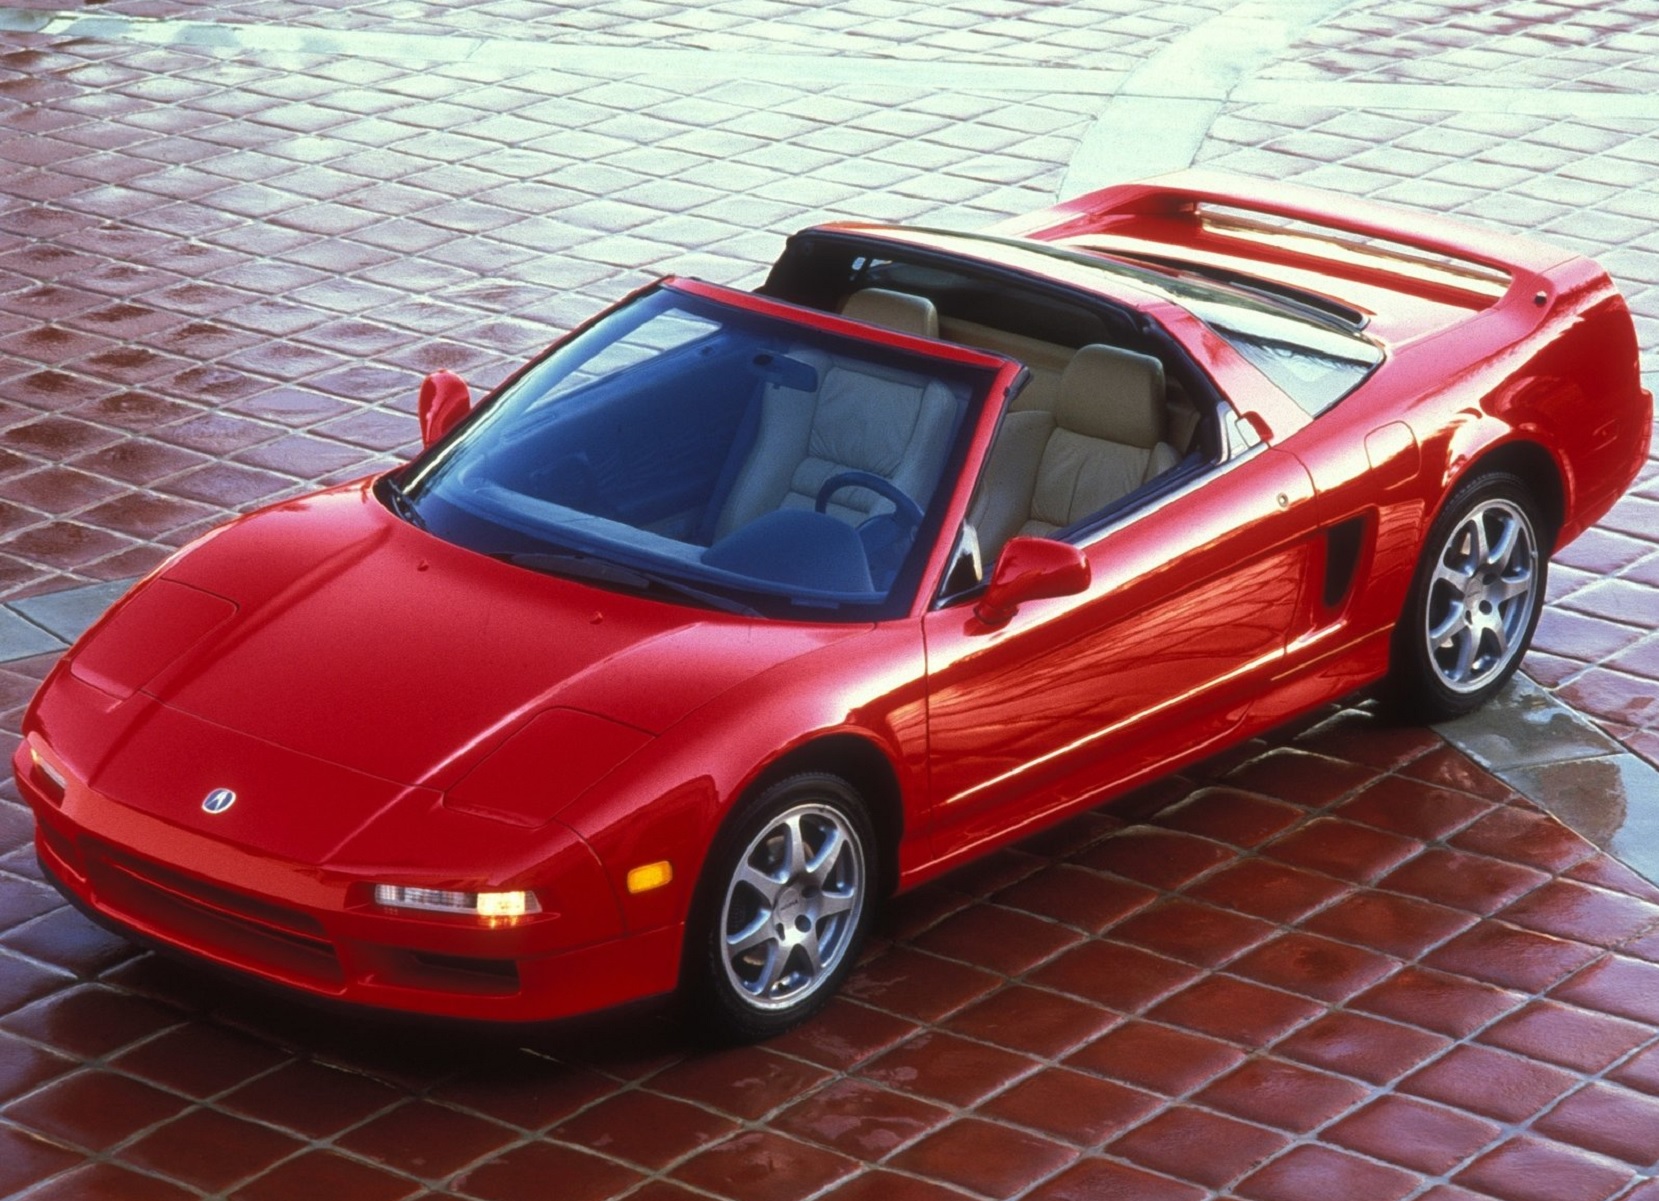 First-Gen Acura NSX Owners May Soon Have the Option of a Full Restoration